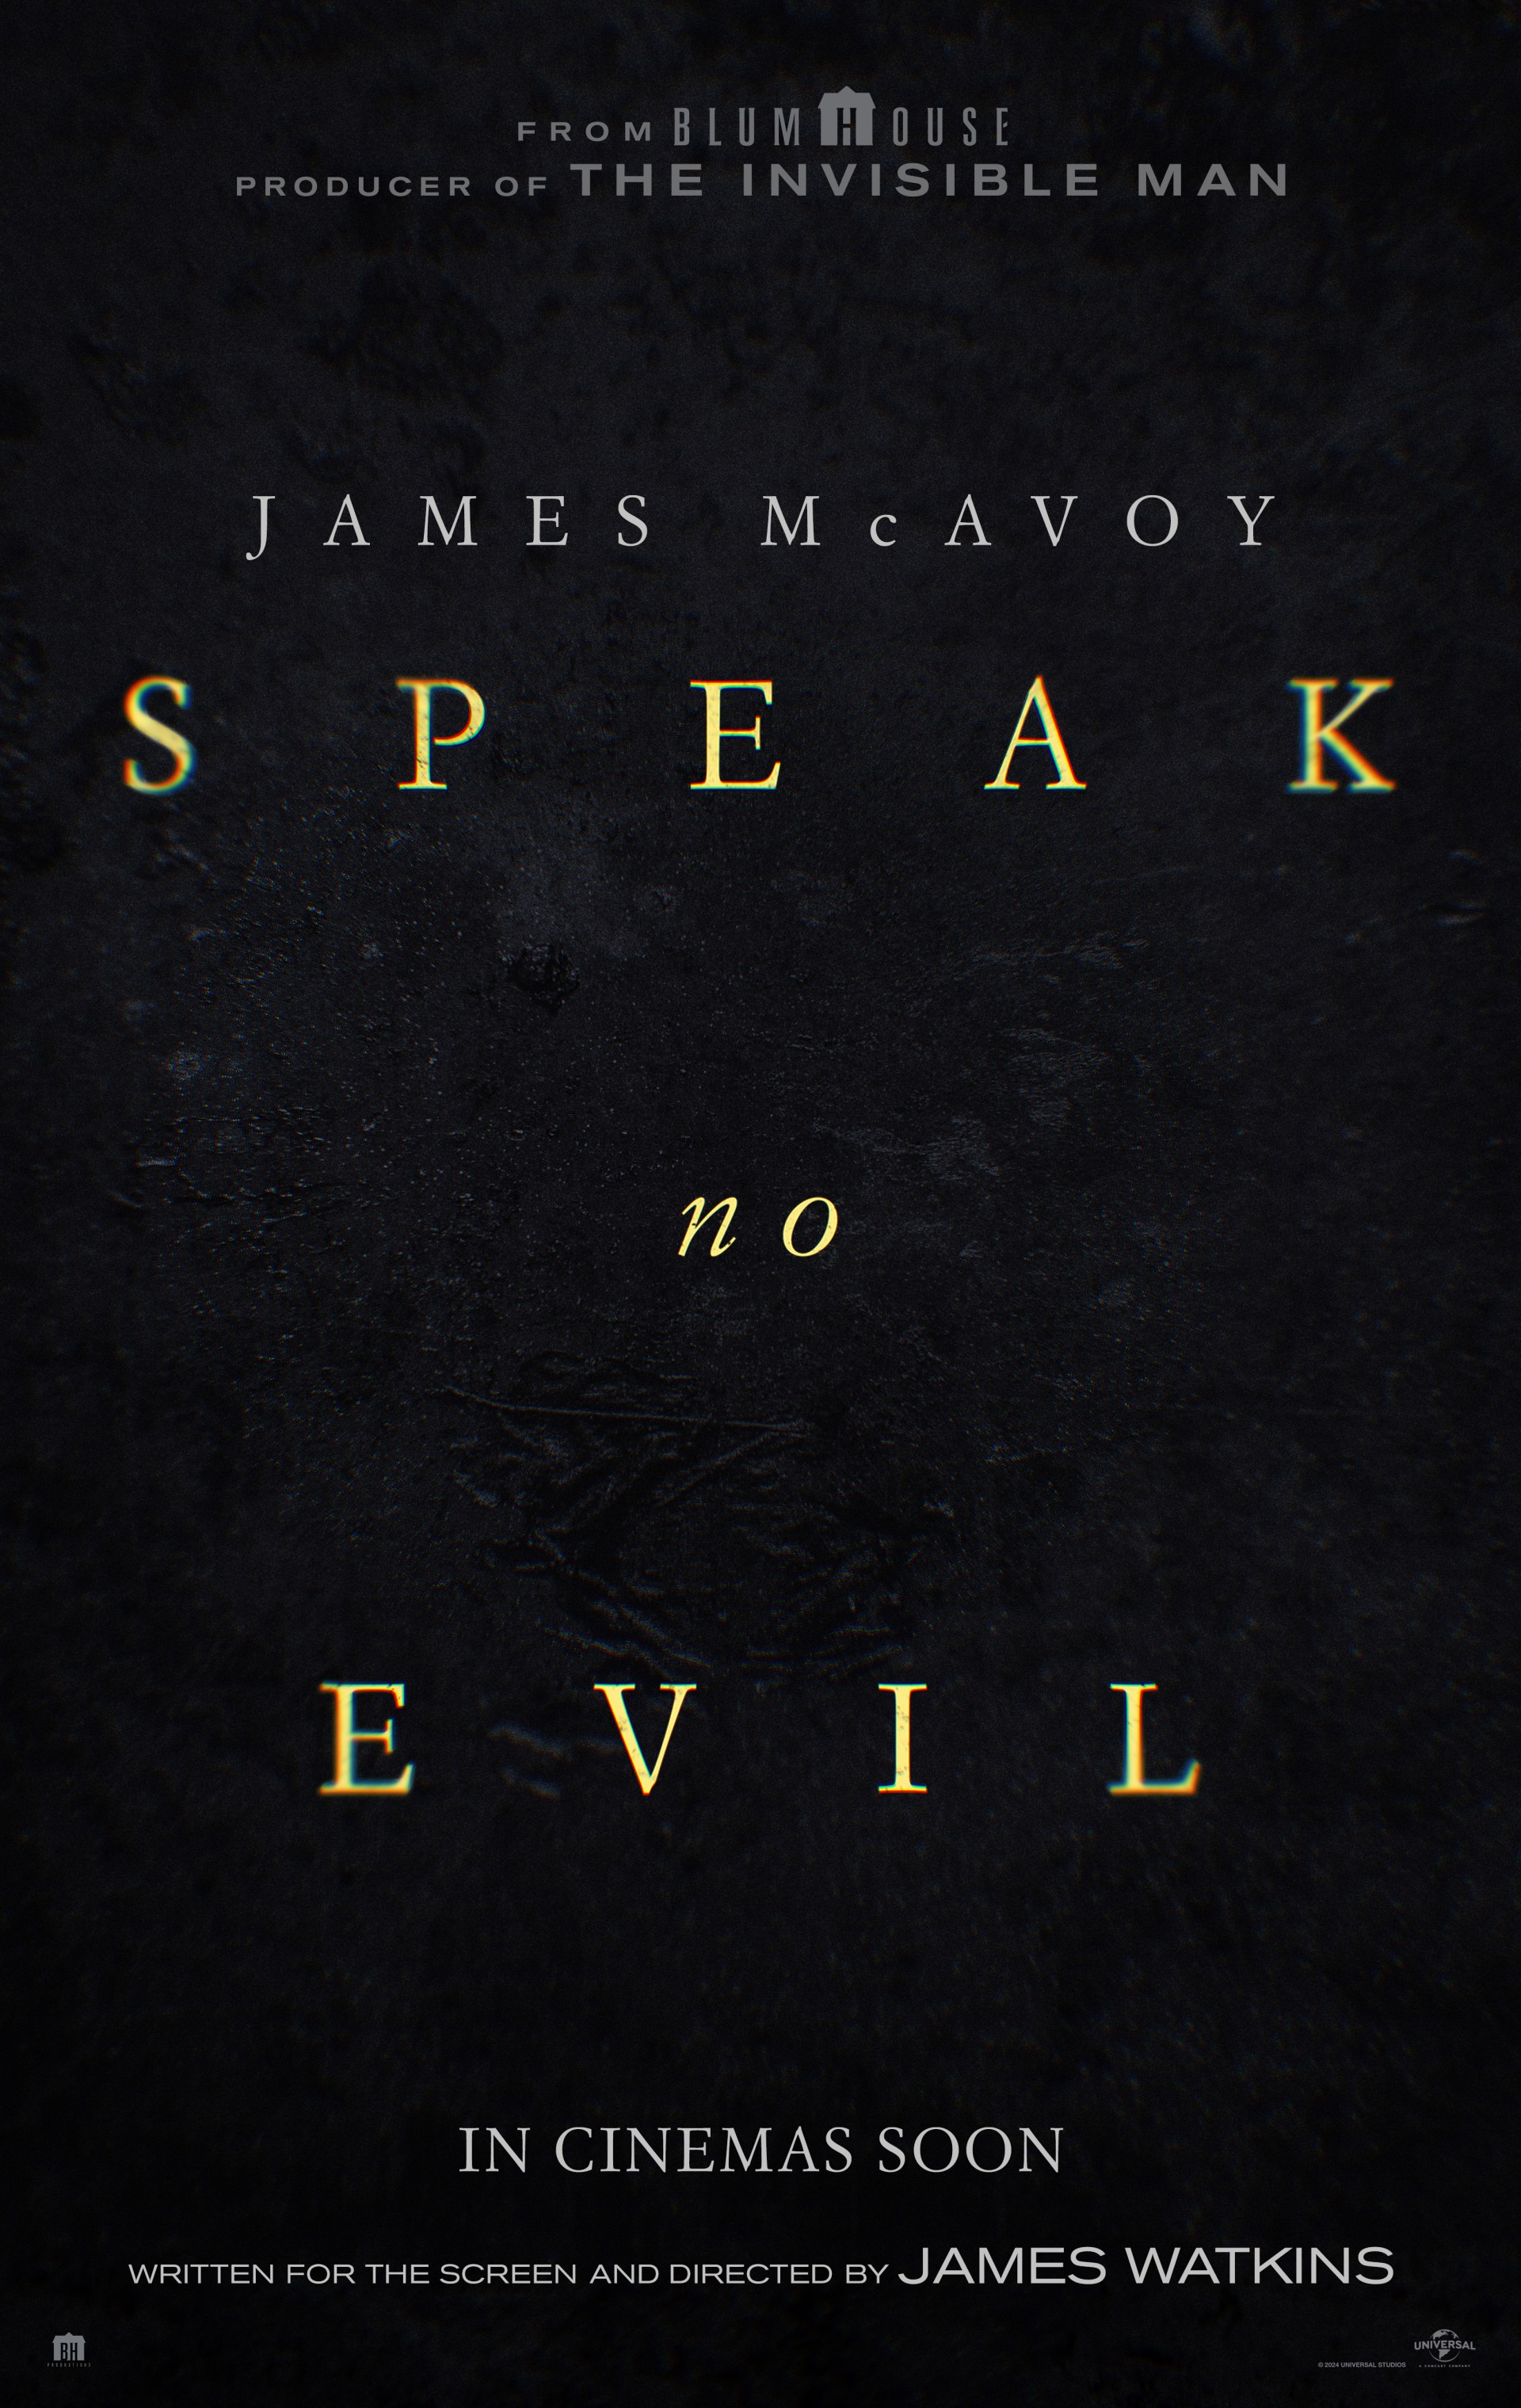 amazon, speak no evil doesn't need a hollywood remake - even with james mcavoy